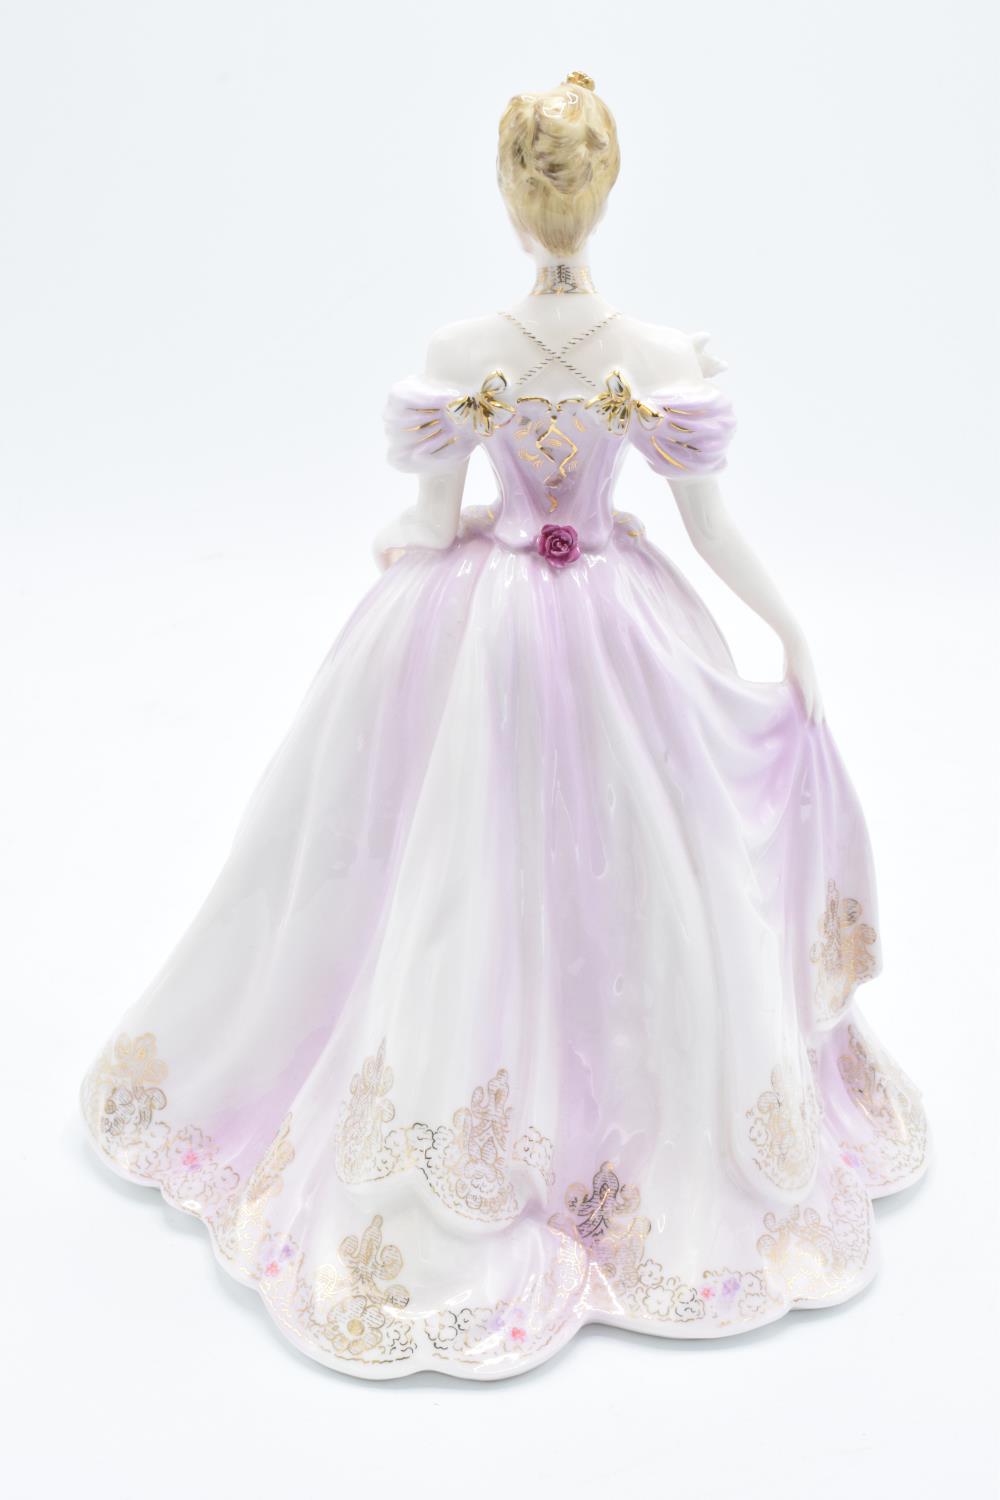 Coalport limited edition figure 'The Fairytale Begins' CW511. 563/12,500. In good condition with - Image 3 of 5